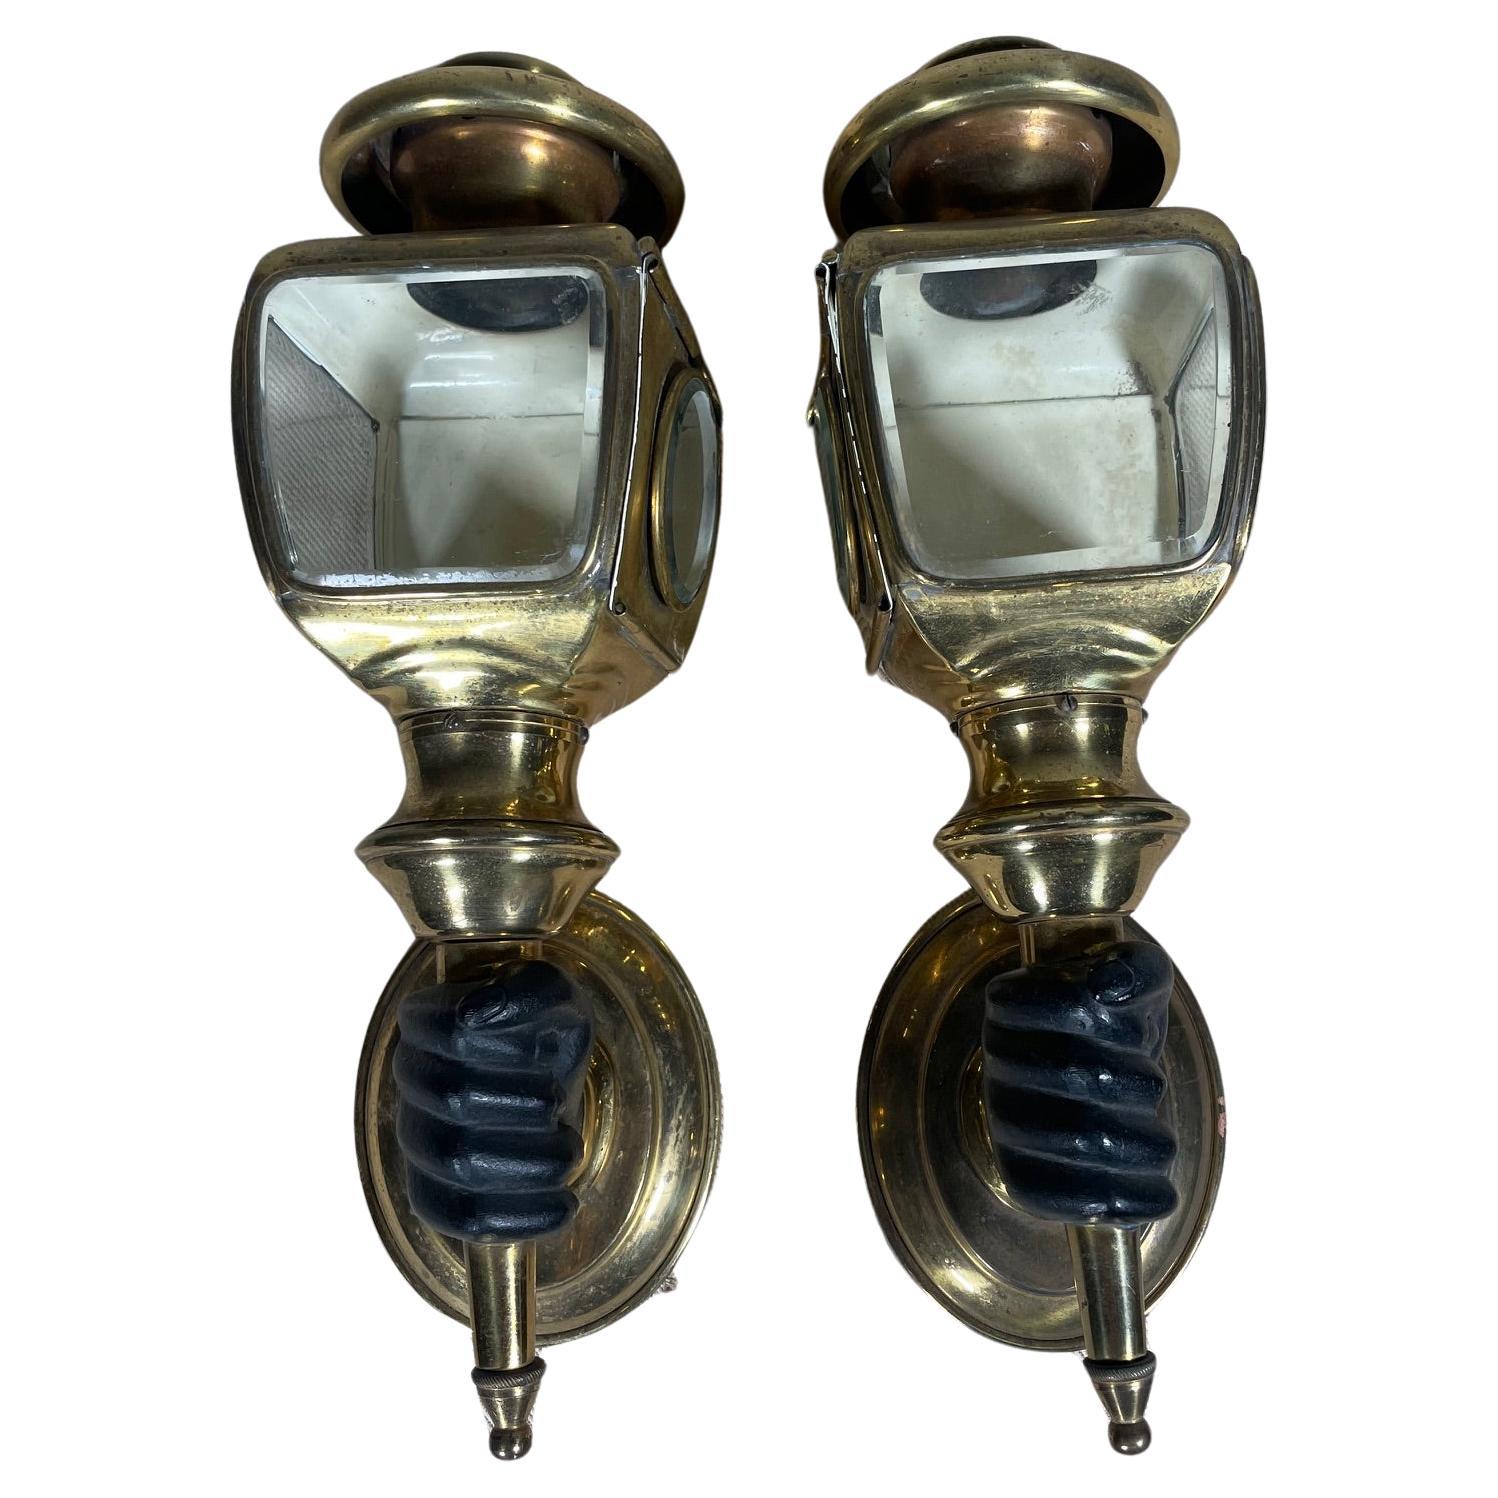 Pair Of Sconces From The 19th Century